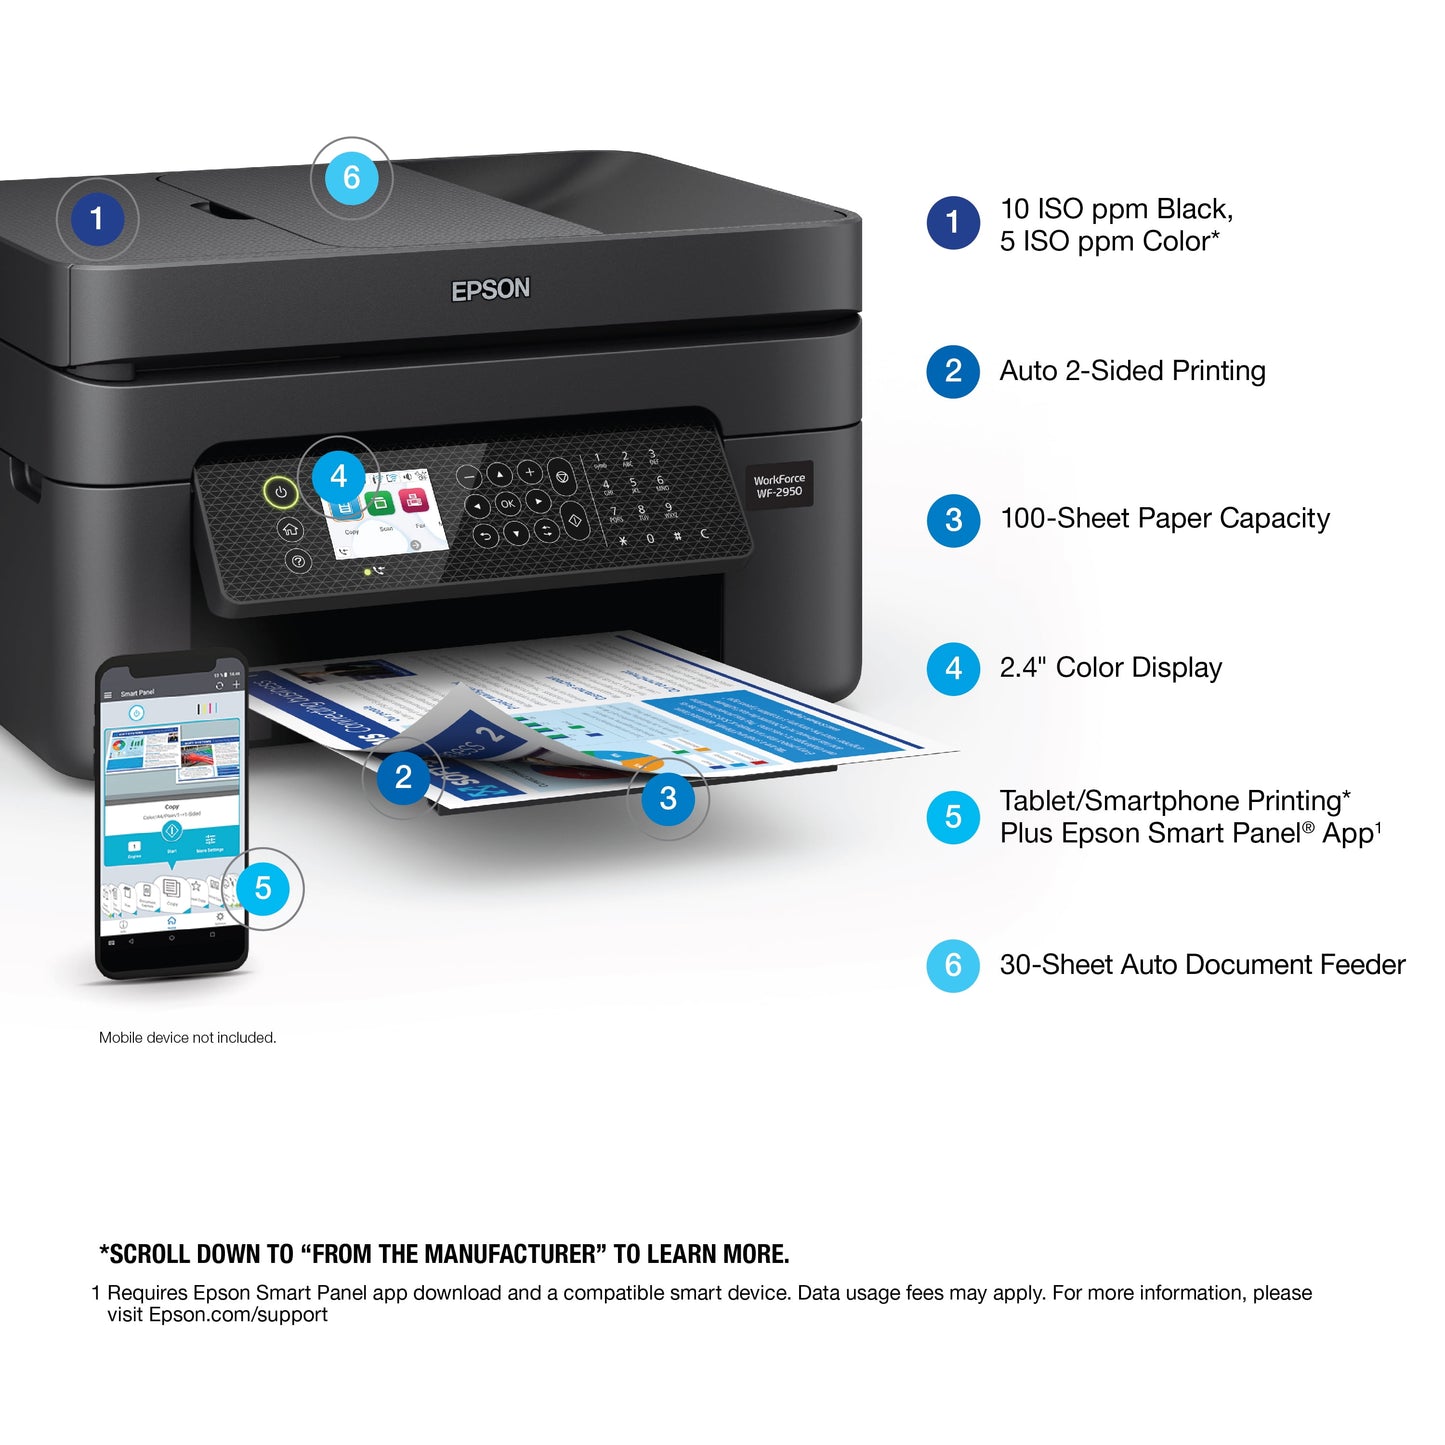 Epson Workforce WF-2950 All-In-One Wireless Color Printer with Scanner, Copier and Fax